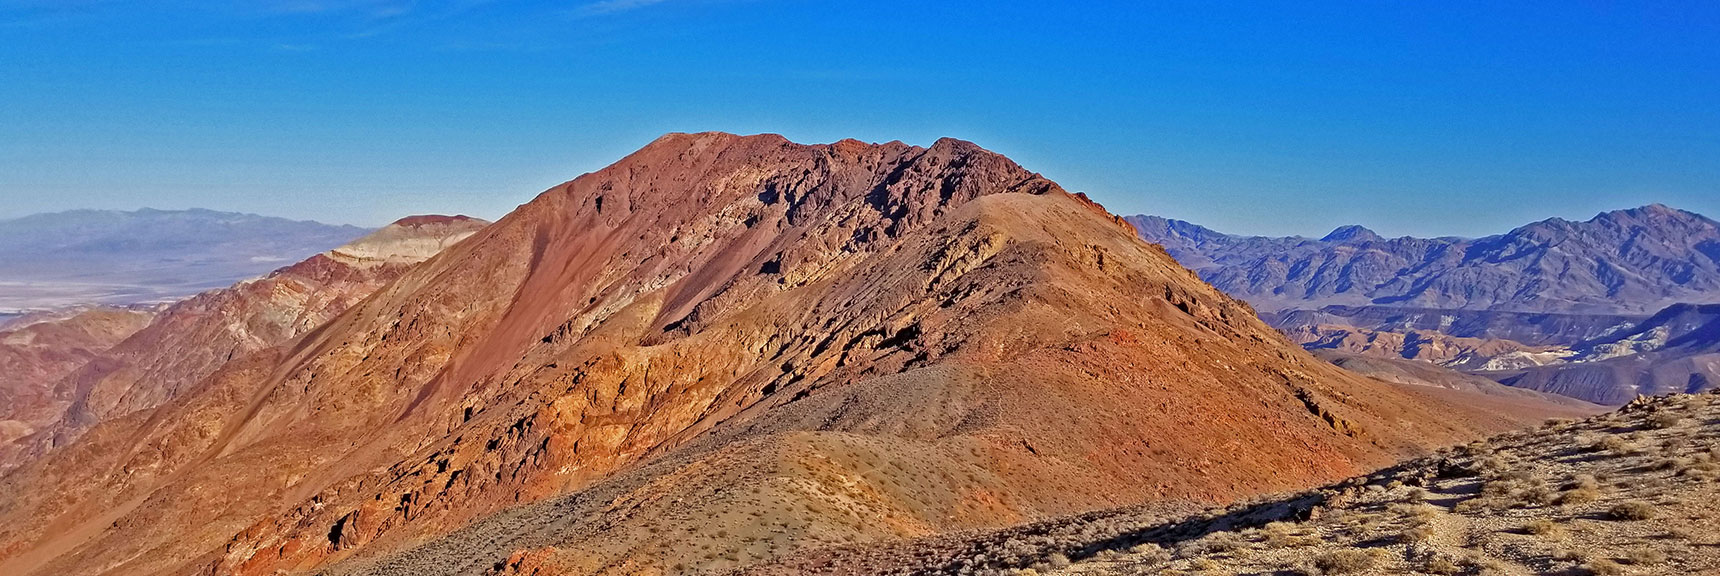 Approaching Mt. Perry from Dante's Ridge | Dante's View to Mt. Perry | Death Valley National Park, CA